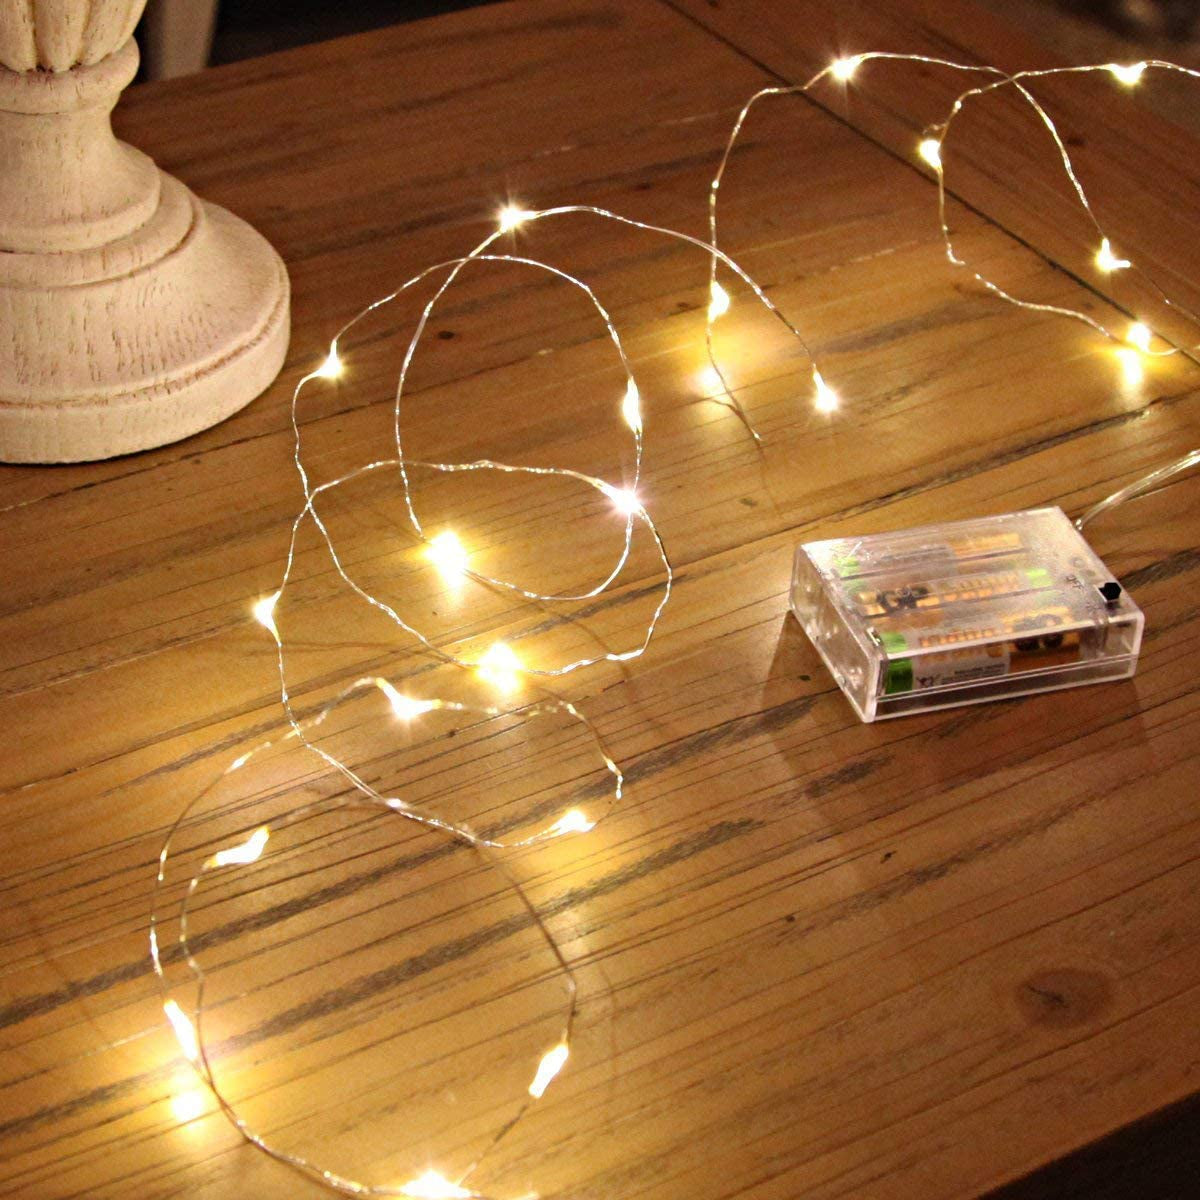 Led Fairy Lights Battery Operated, 2 Packs Mini Battery Powered Copper Wire Starry Fairy Lights for Bedroom, Christmas, Parties, Wedding, Centerpiece, Decoration (5M/16Ft Warm White)